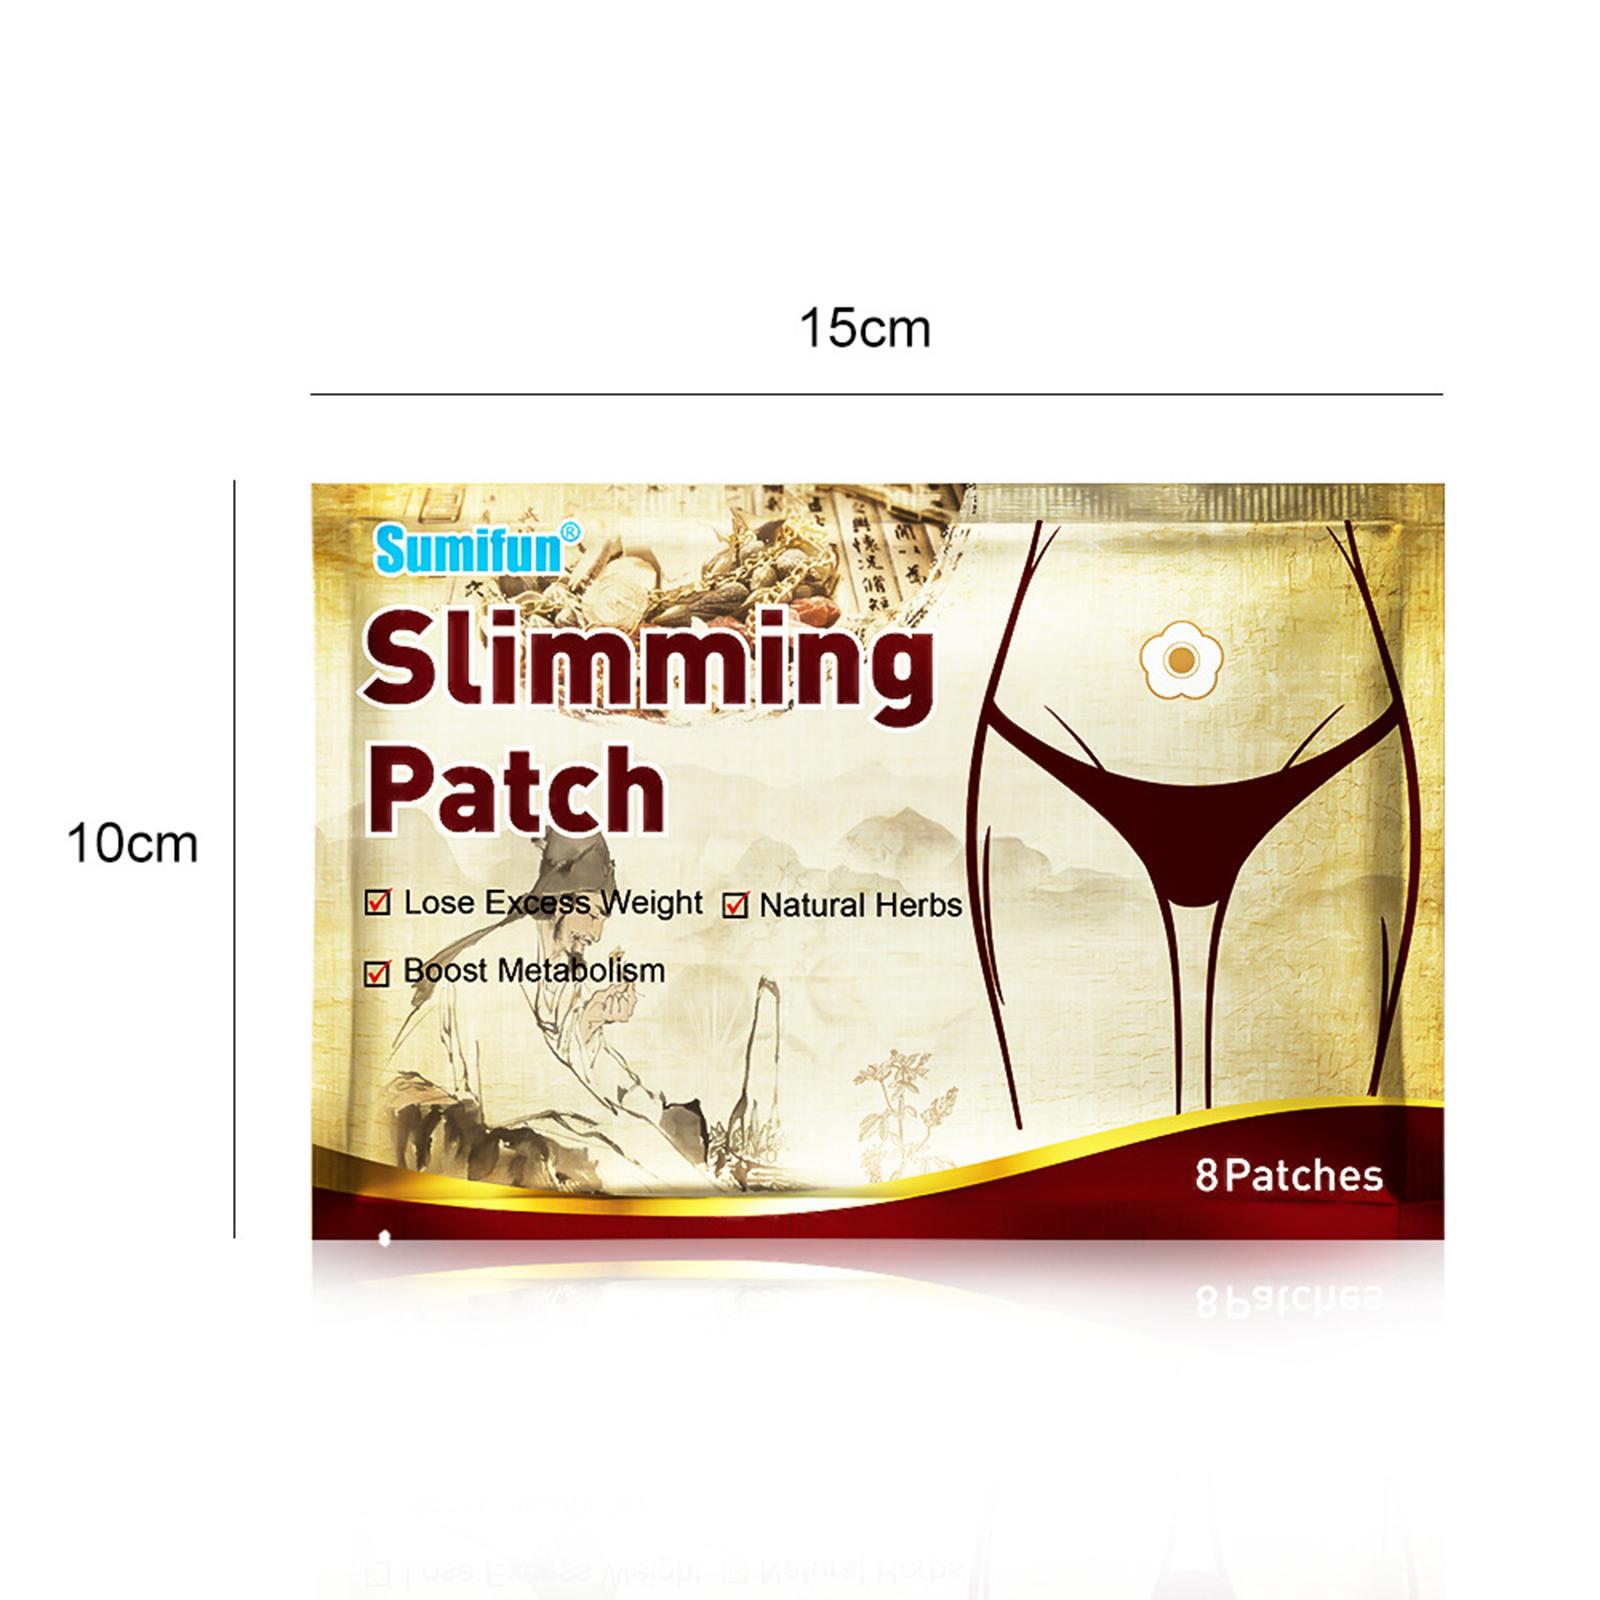 Sumifun 8 Patches Slim Patch Lose Weight Plaster Slimming Sticker Burning Fat Body Beauty Shaper Slim Pad Boost Metabolism